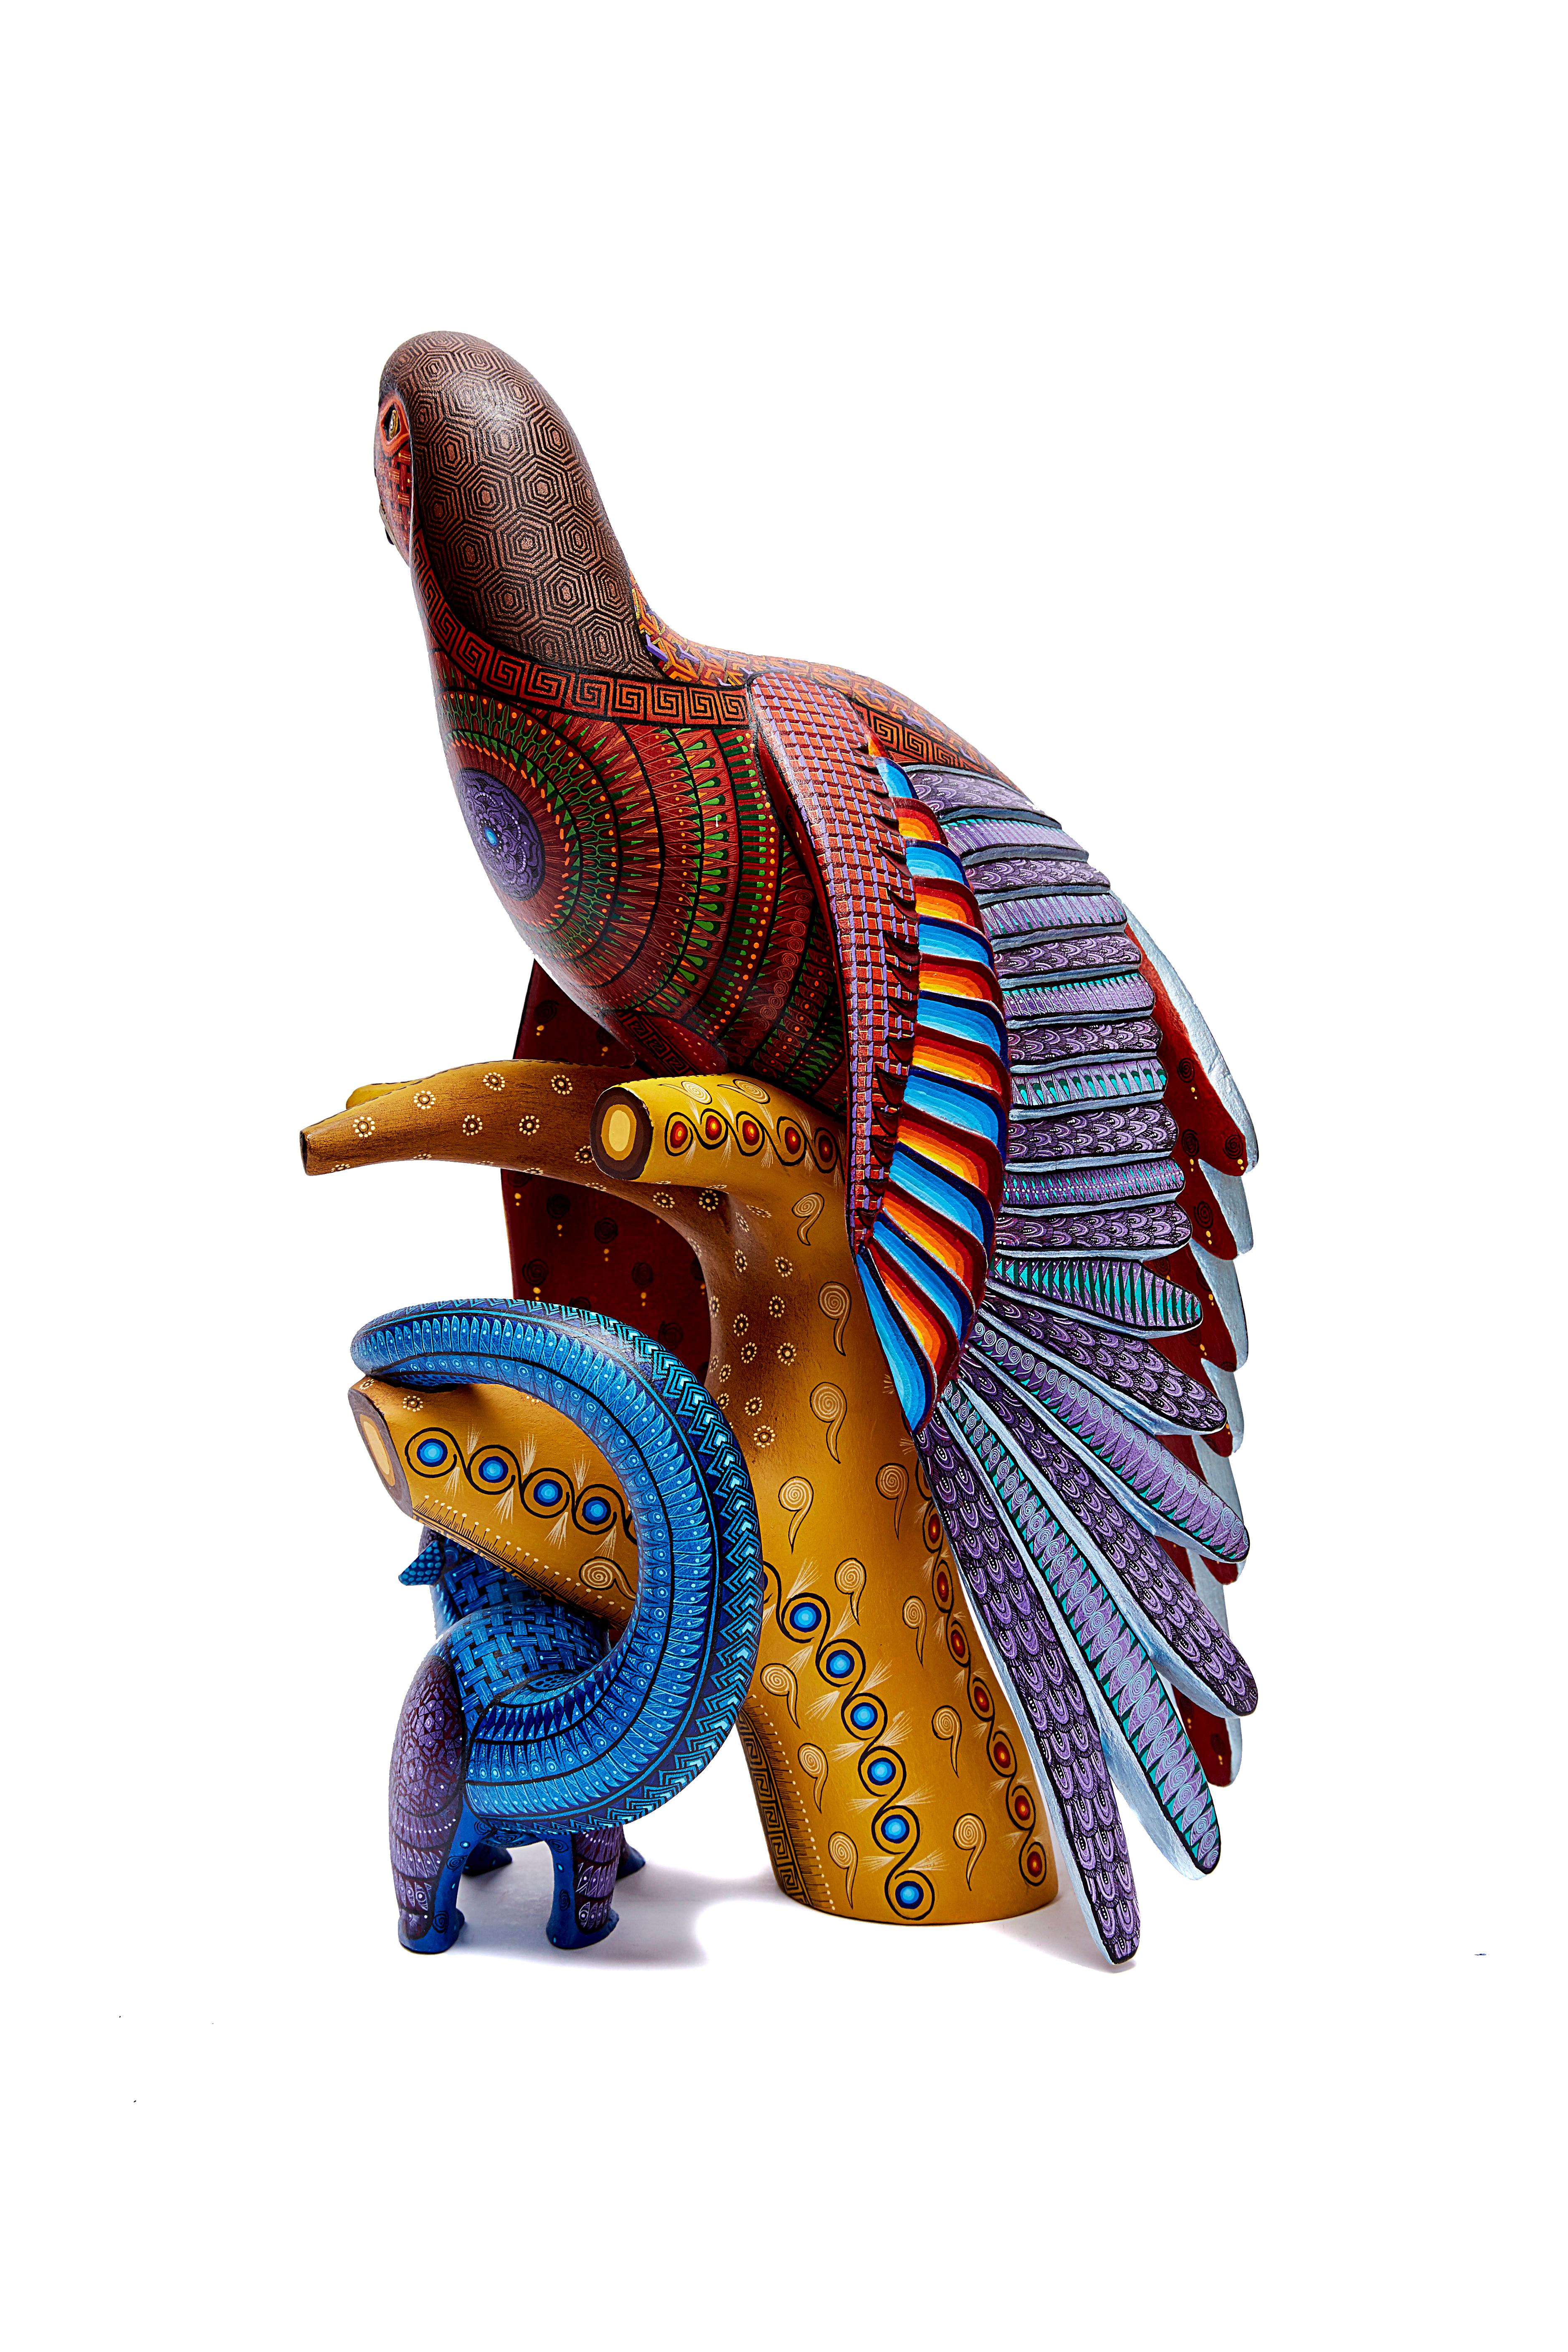 Tucan Majestuoso - Toucan Alebrije
This Mexican Tucan -  Toucan Alebrije made with Copal wood, wood carving technique gouges, machete and sandpaper, decorated with acrylic paintings with Zapotec symbols.
At Cactus Fine Art, we offer an exclusive